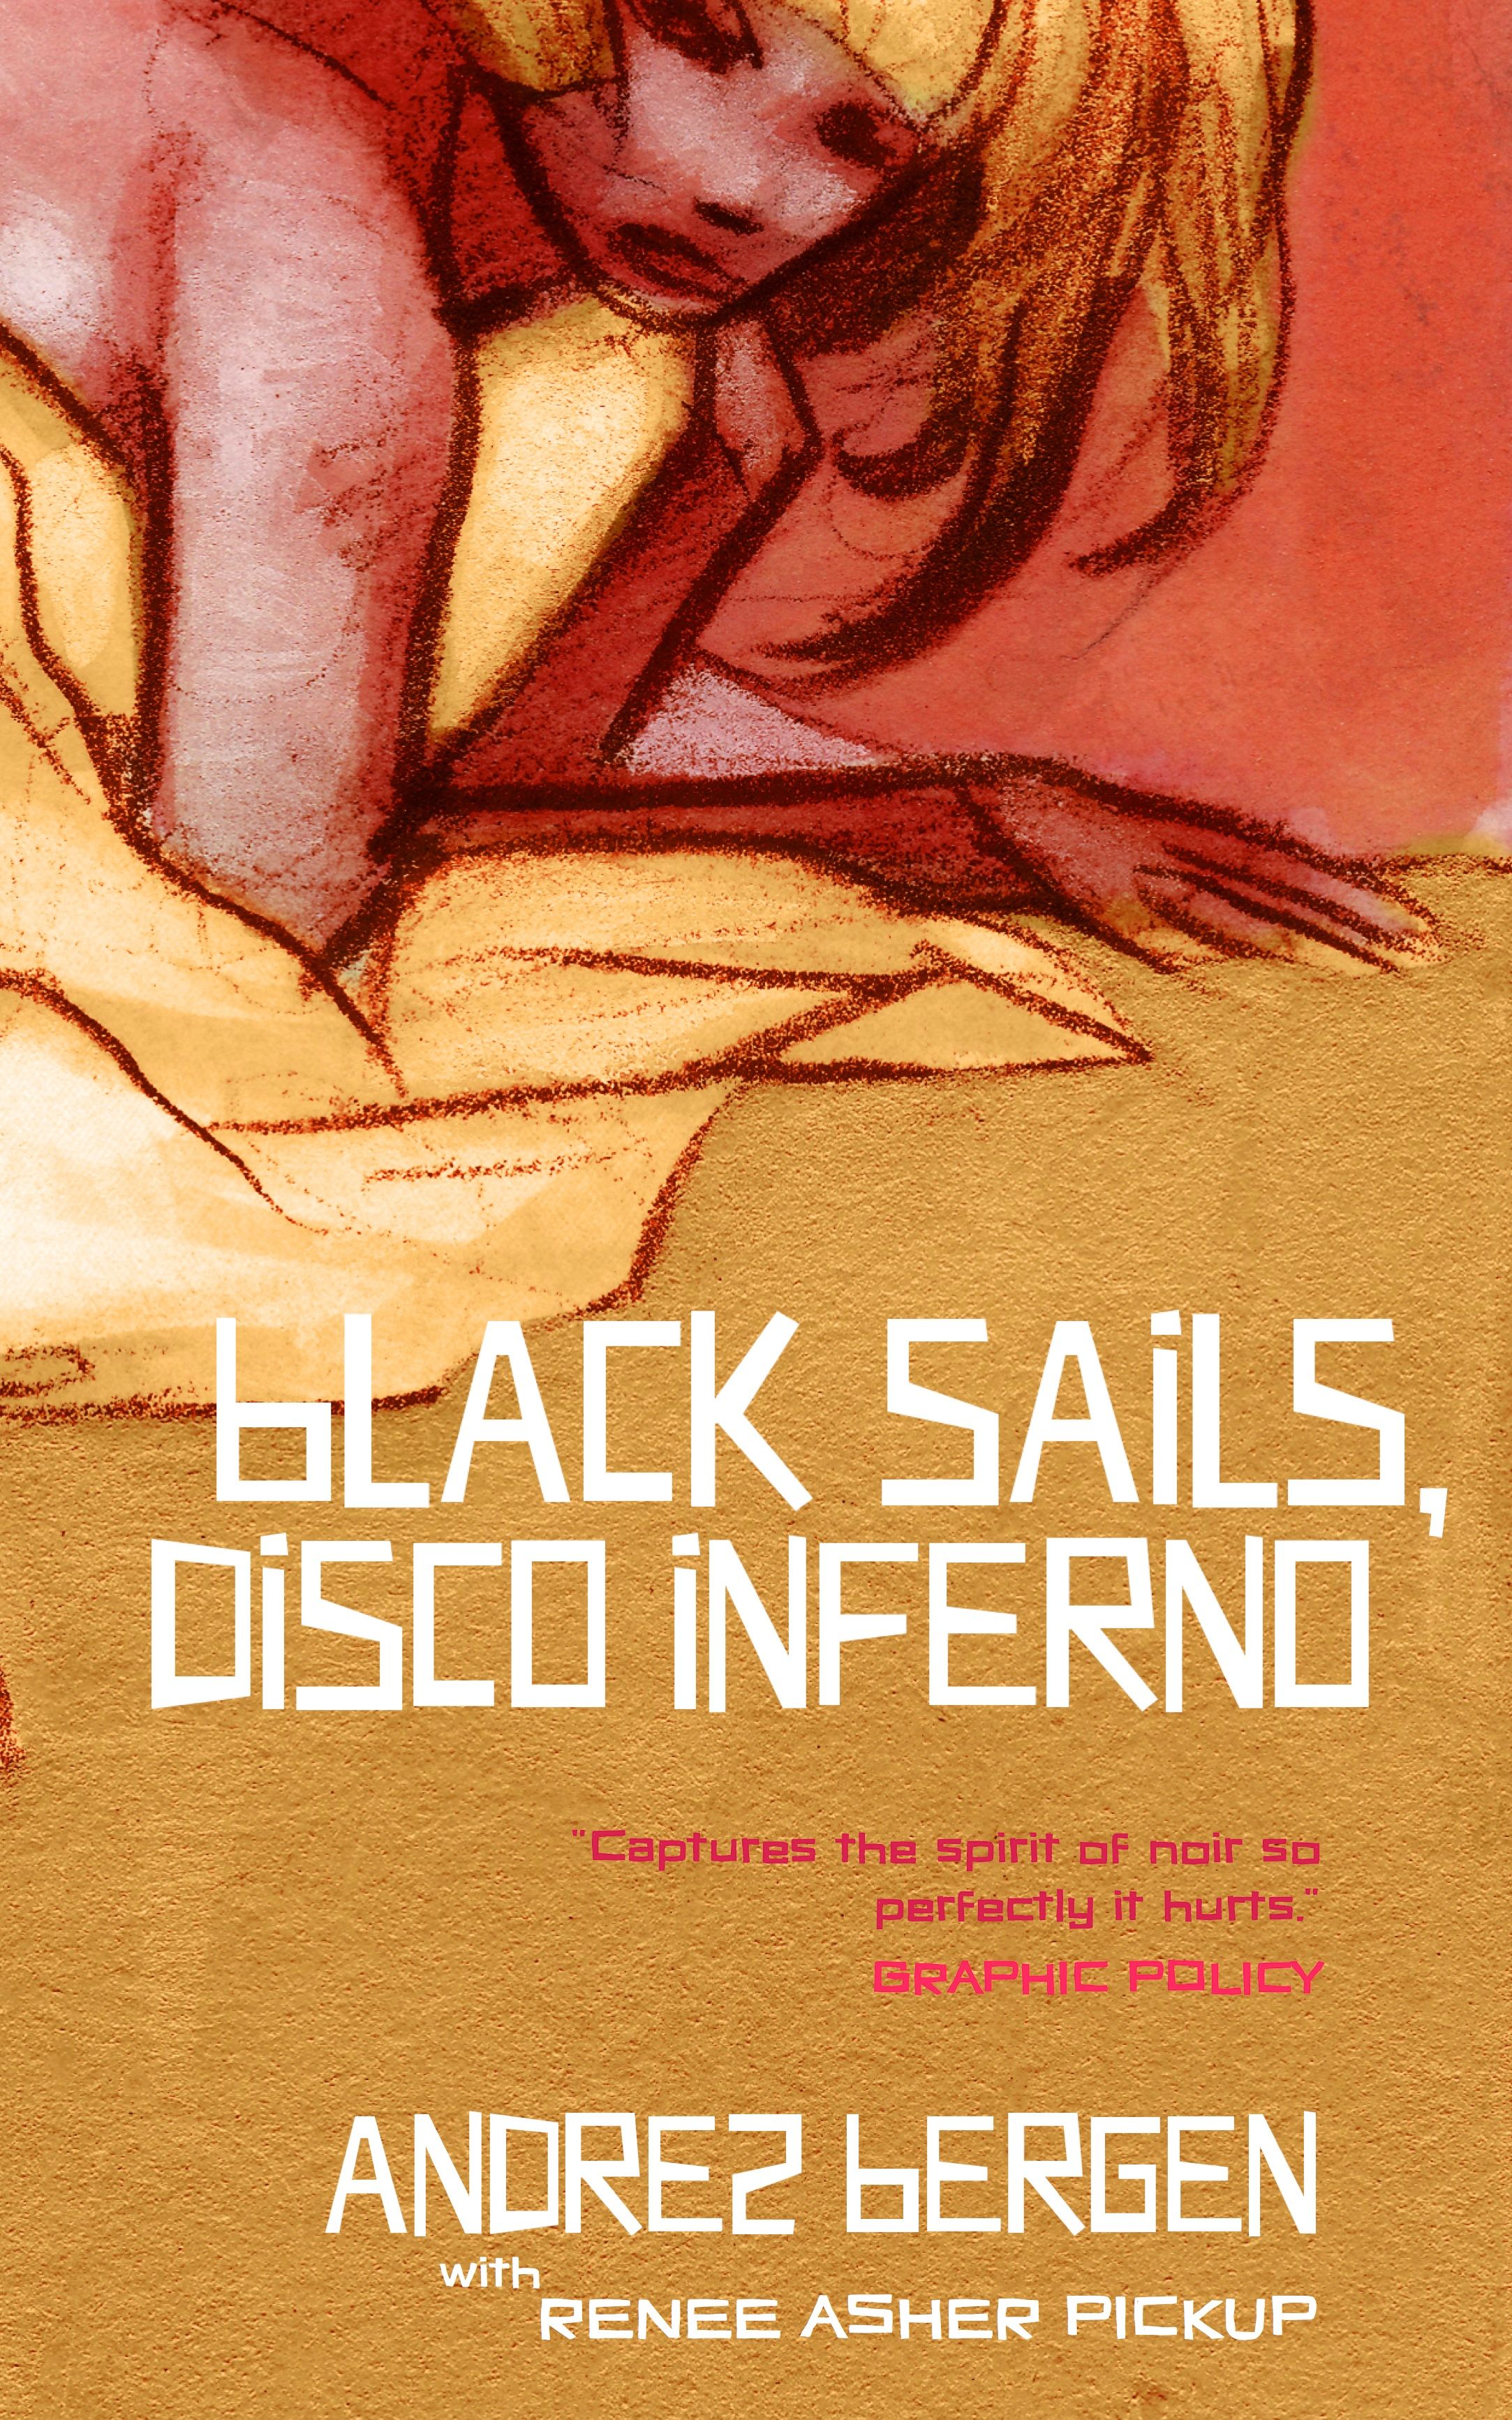 Black Sails, Disco Inferno by Andrez Bergen with Renee Asher Pickup